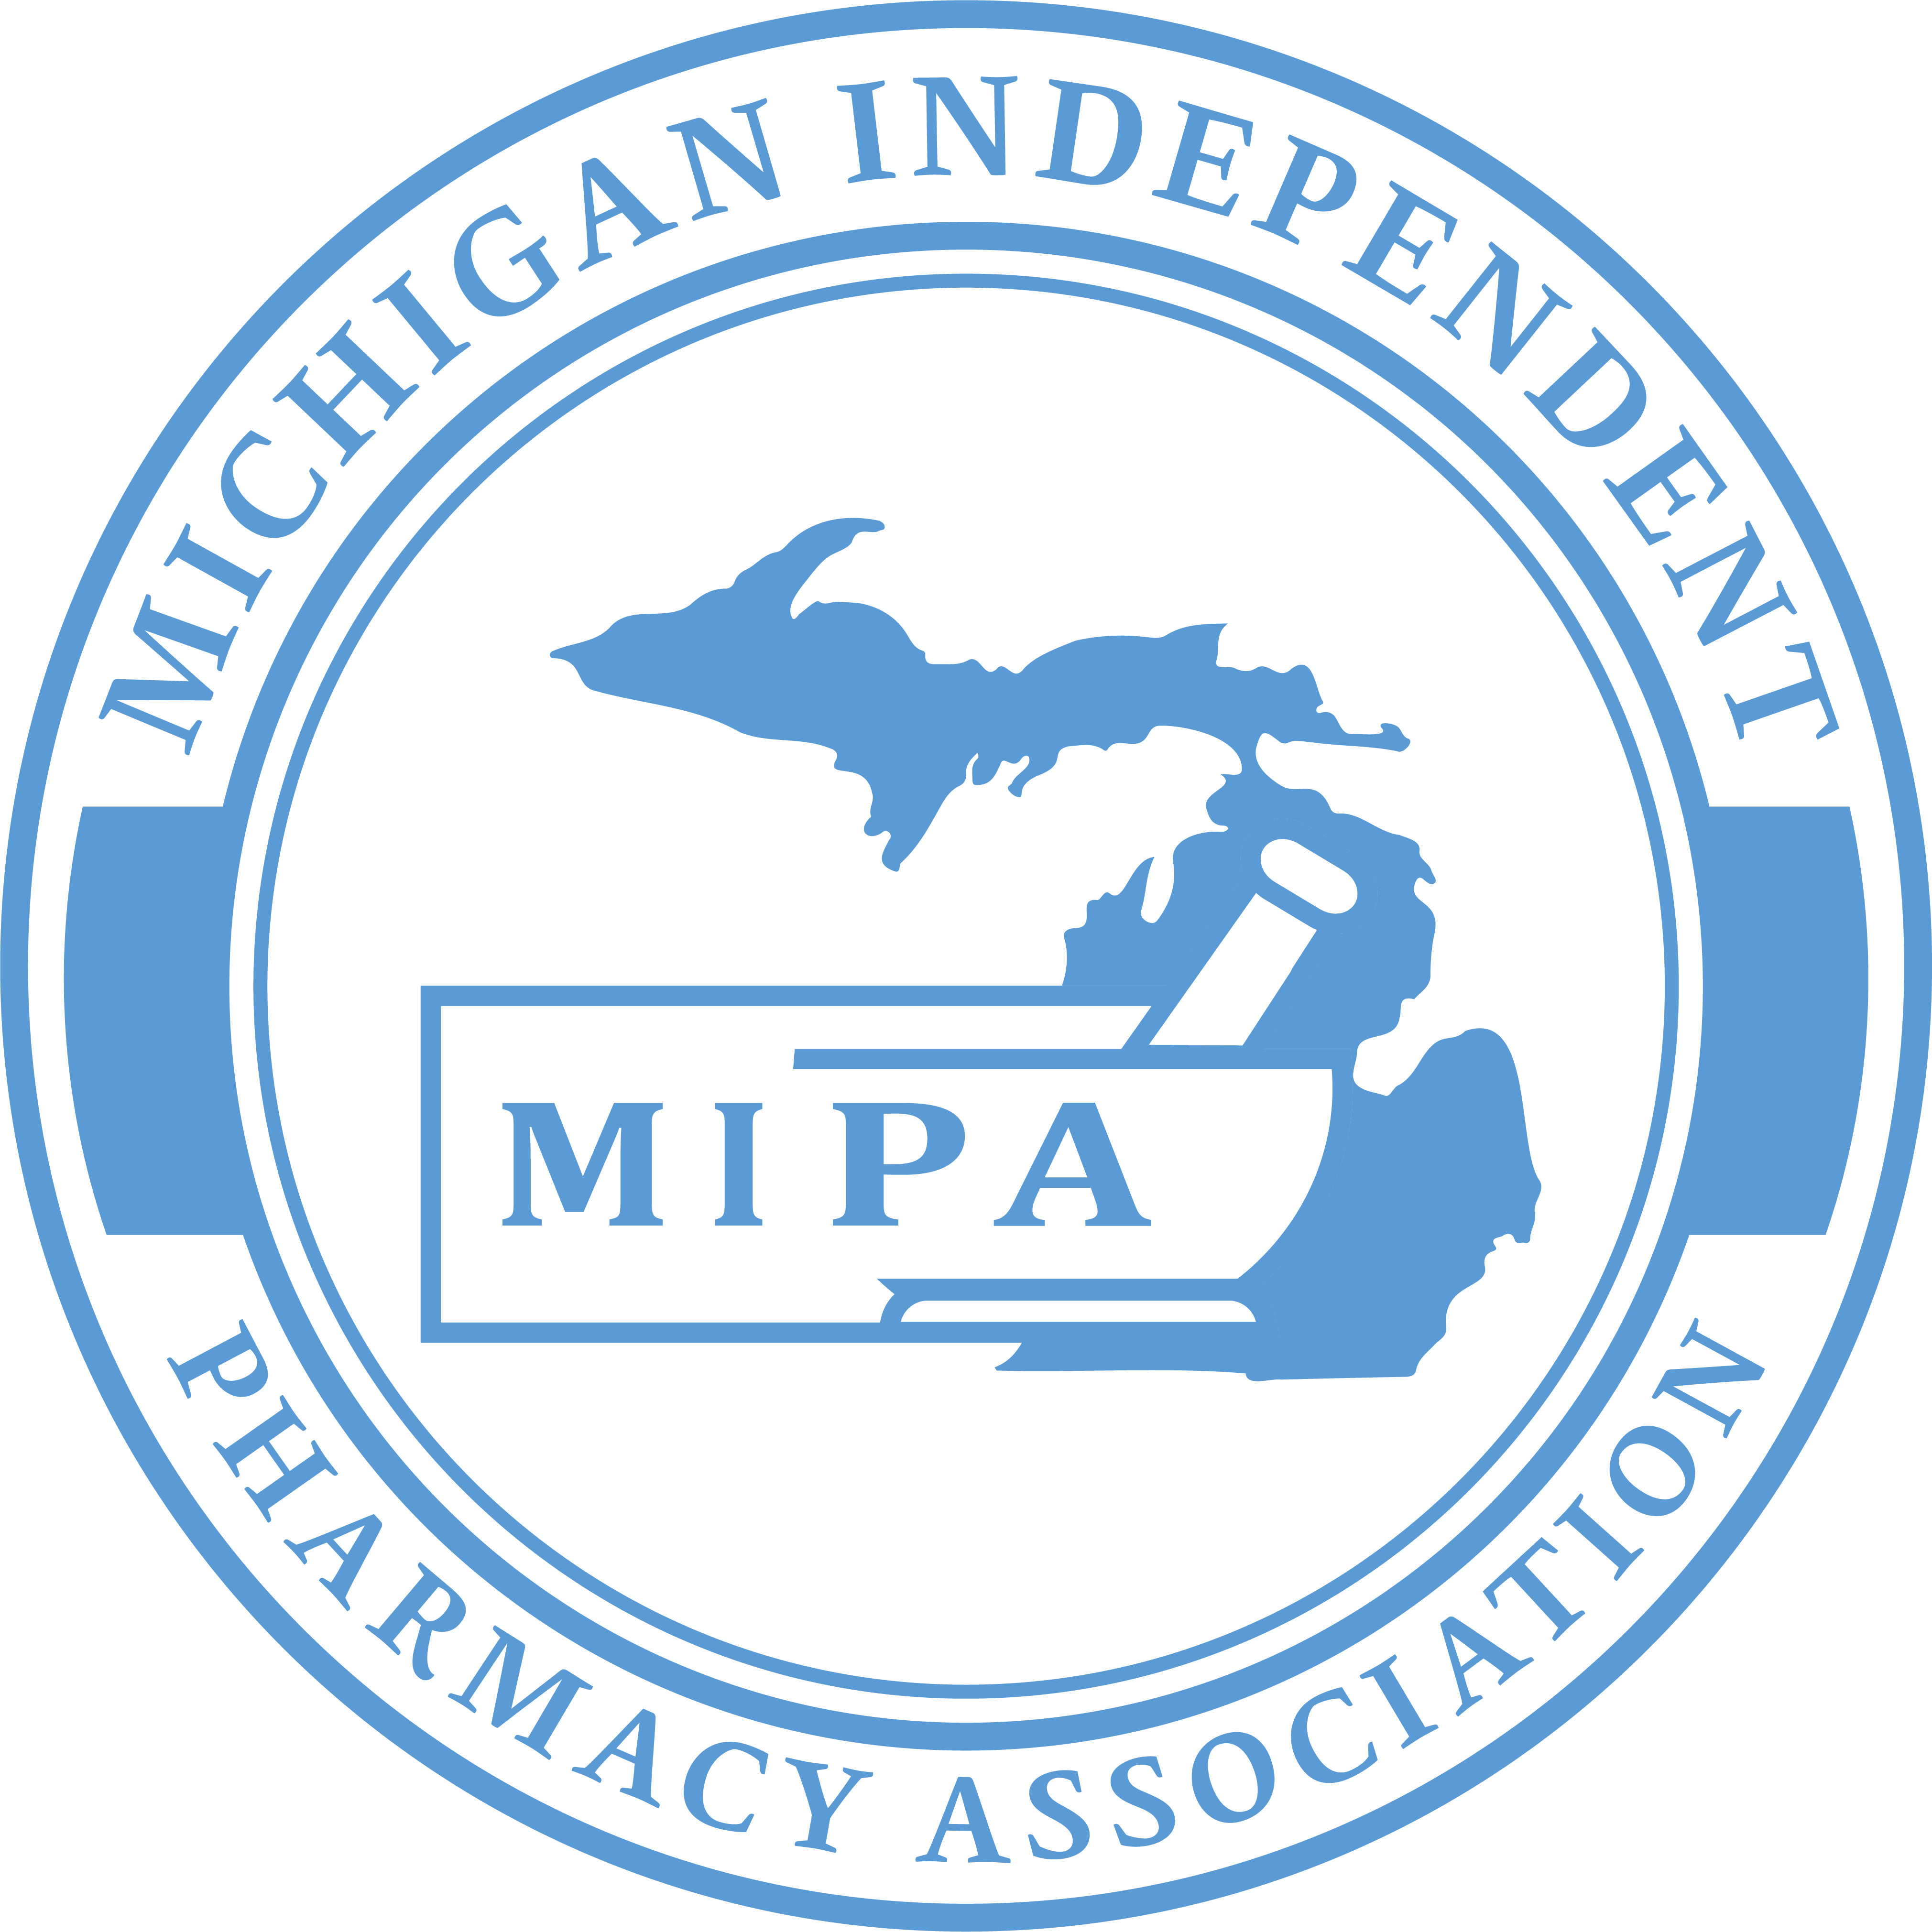 CX-21901_Michigan Independent Pharmacy Association_Complete